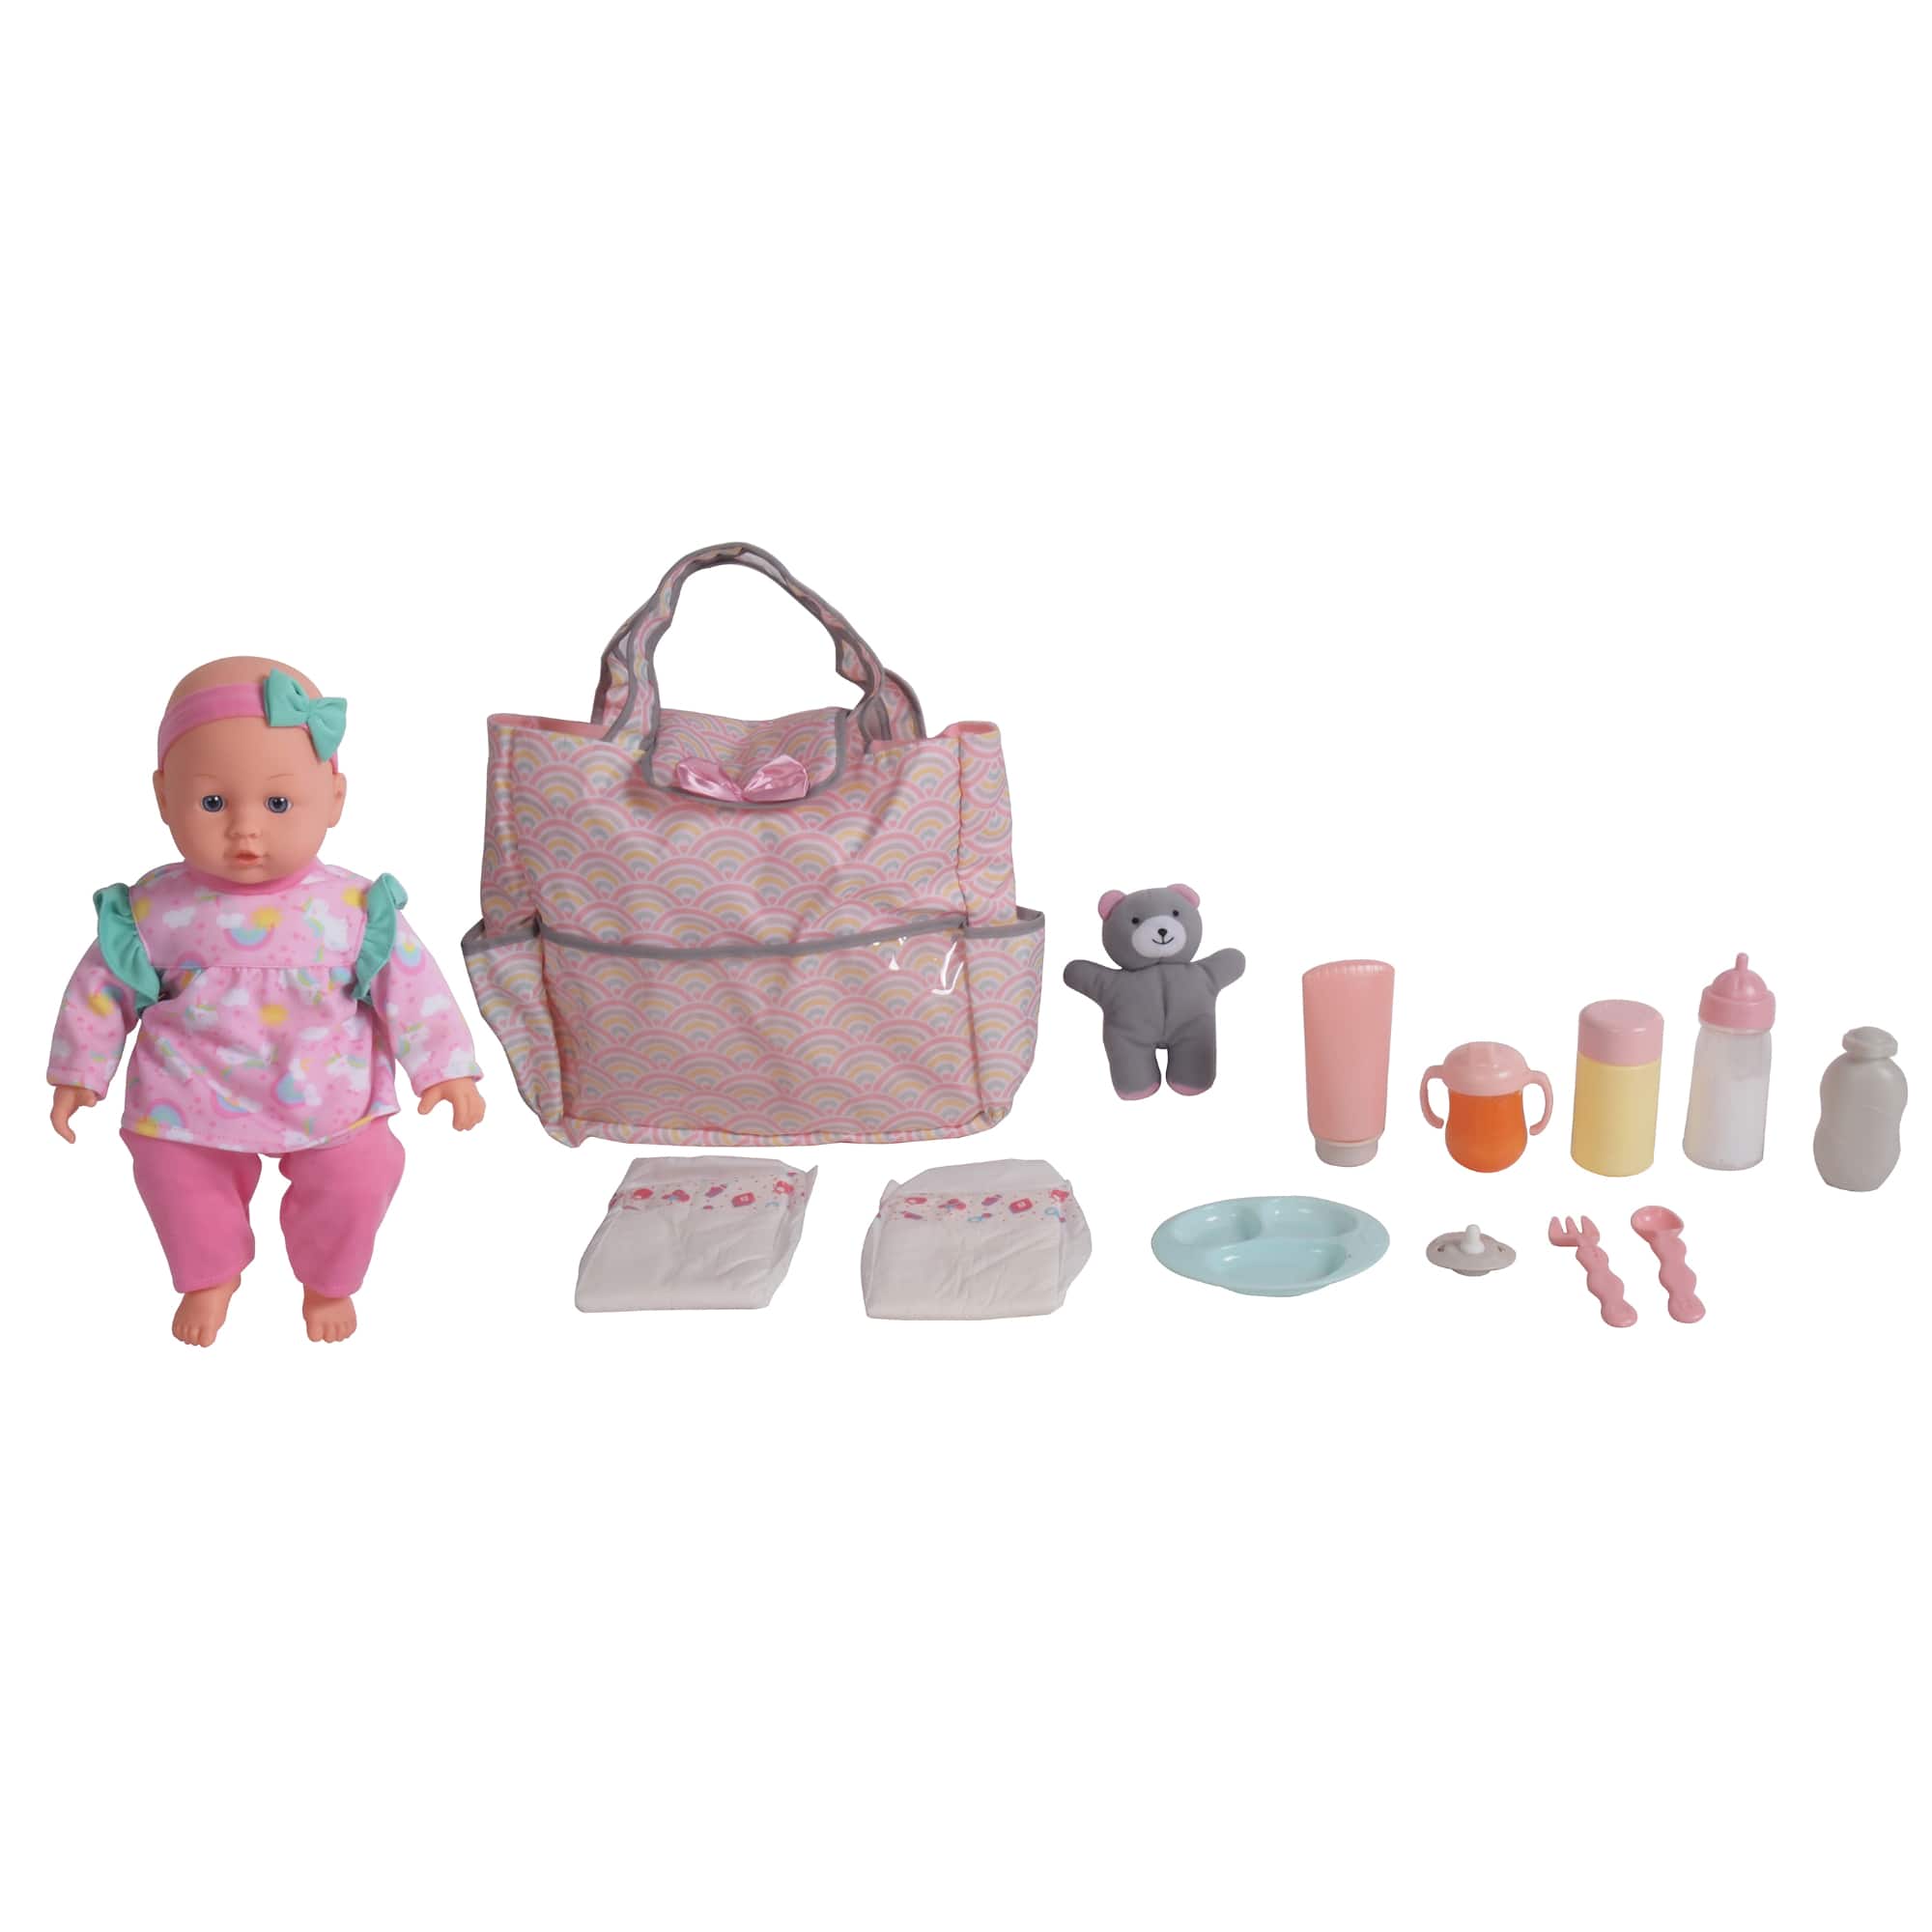 Dream Collection Soft Baby Doll